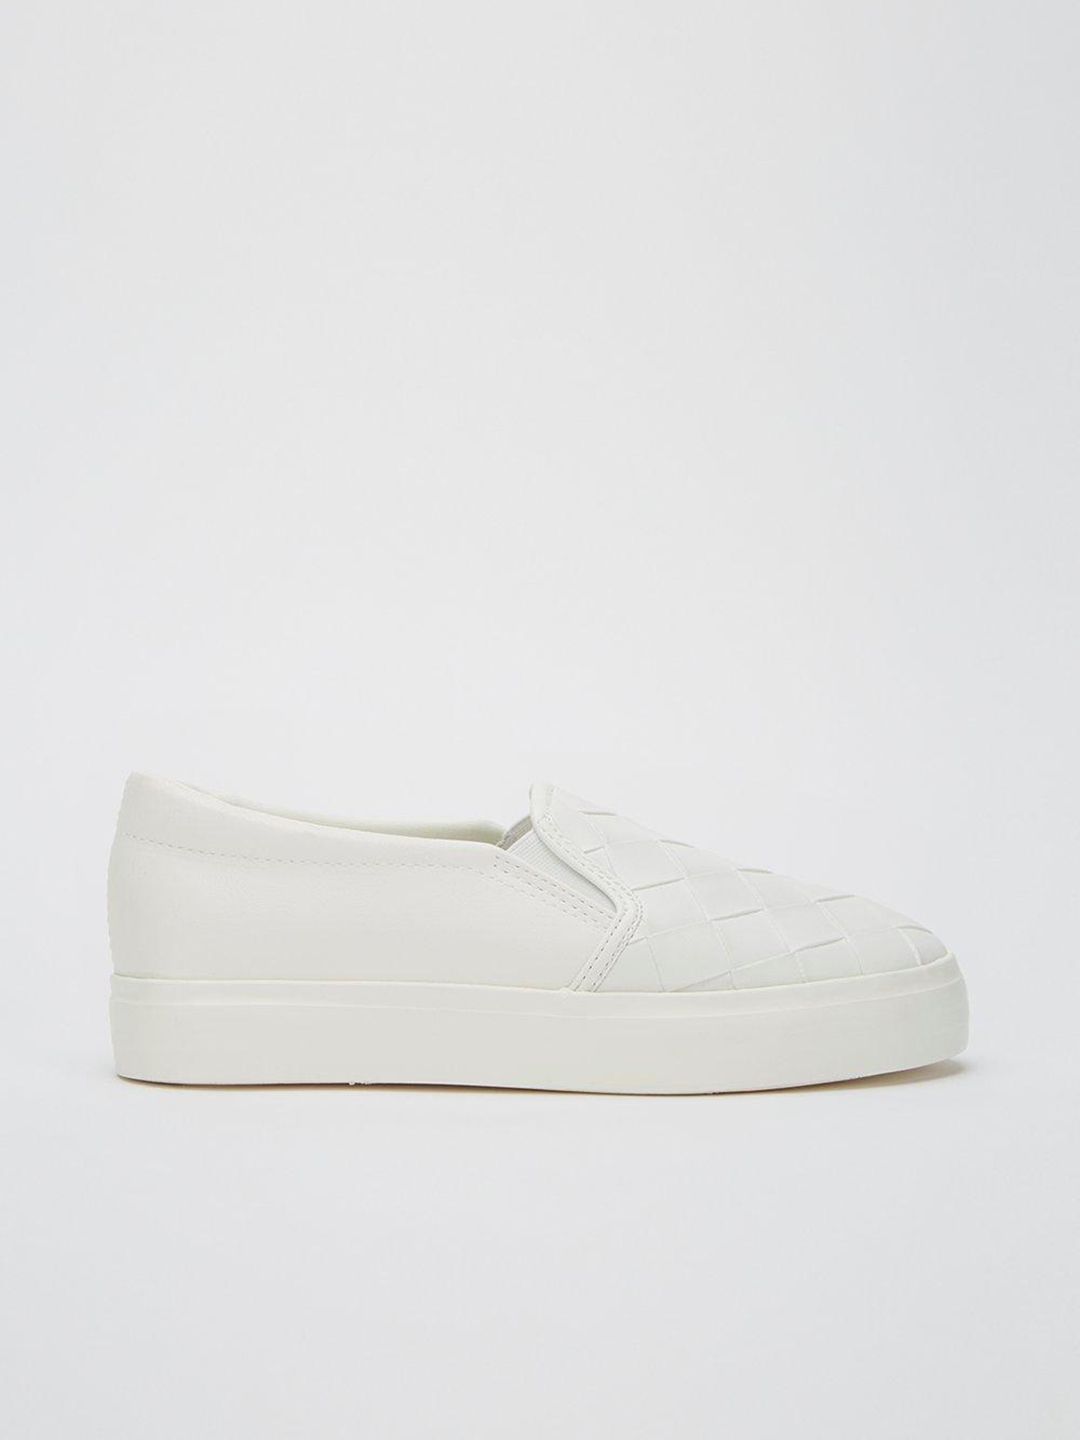 DOROTHY PERKINS Women Woven Textured Slip-On Sneakers Price in India